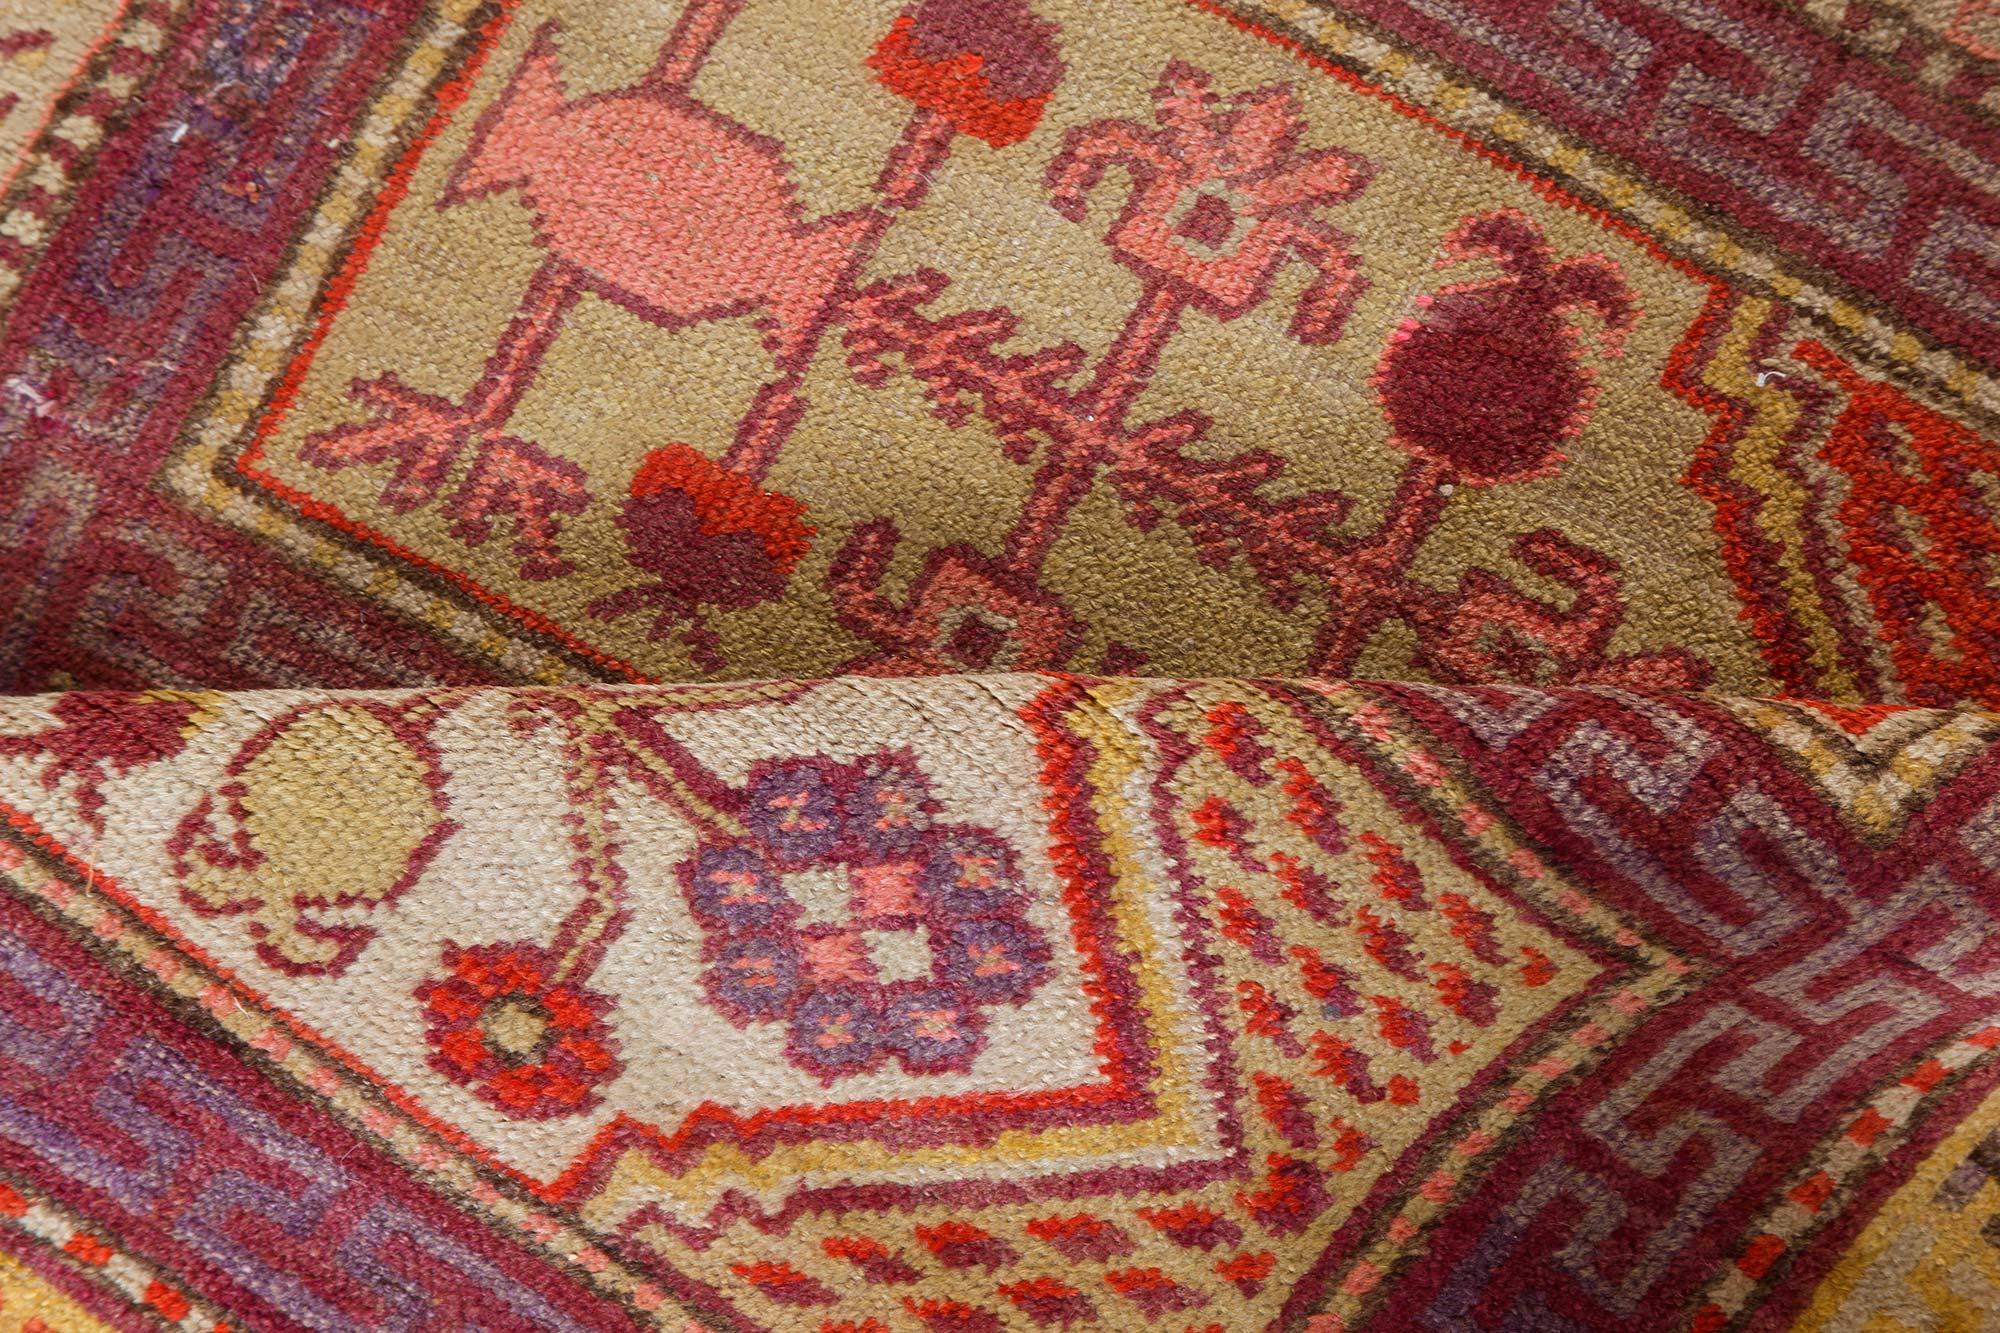 Midcentury Khotan Samarkand Handmade Wool Rug In Good Condition For Sale In New York, NY